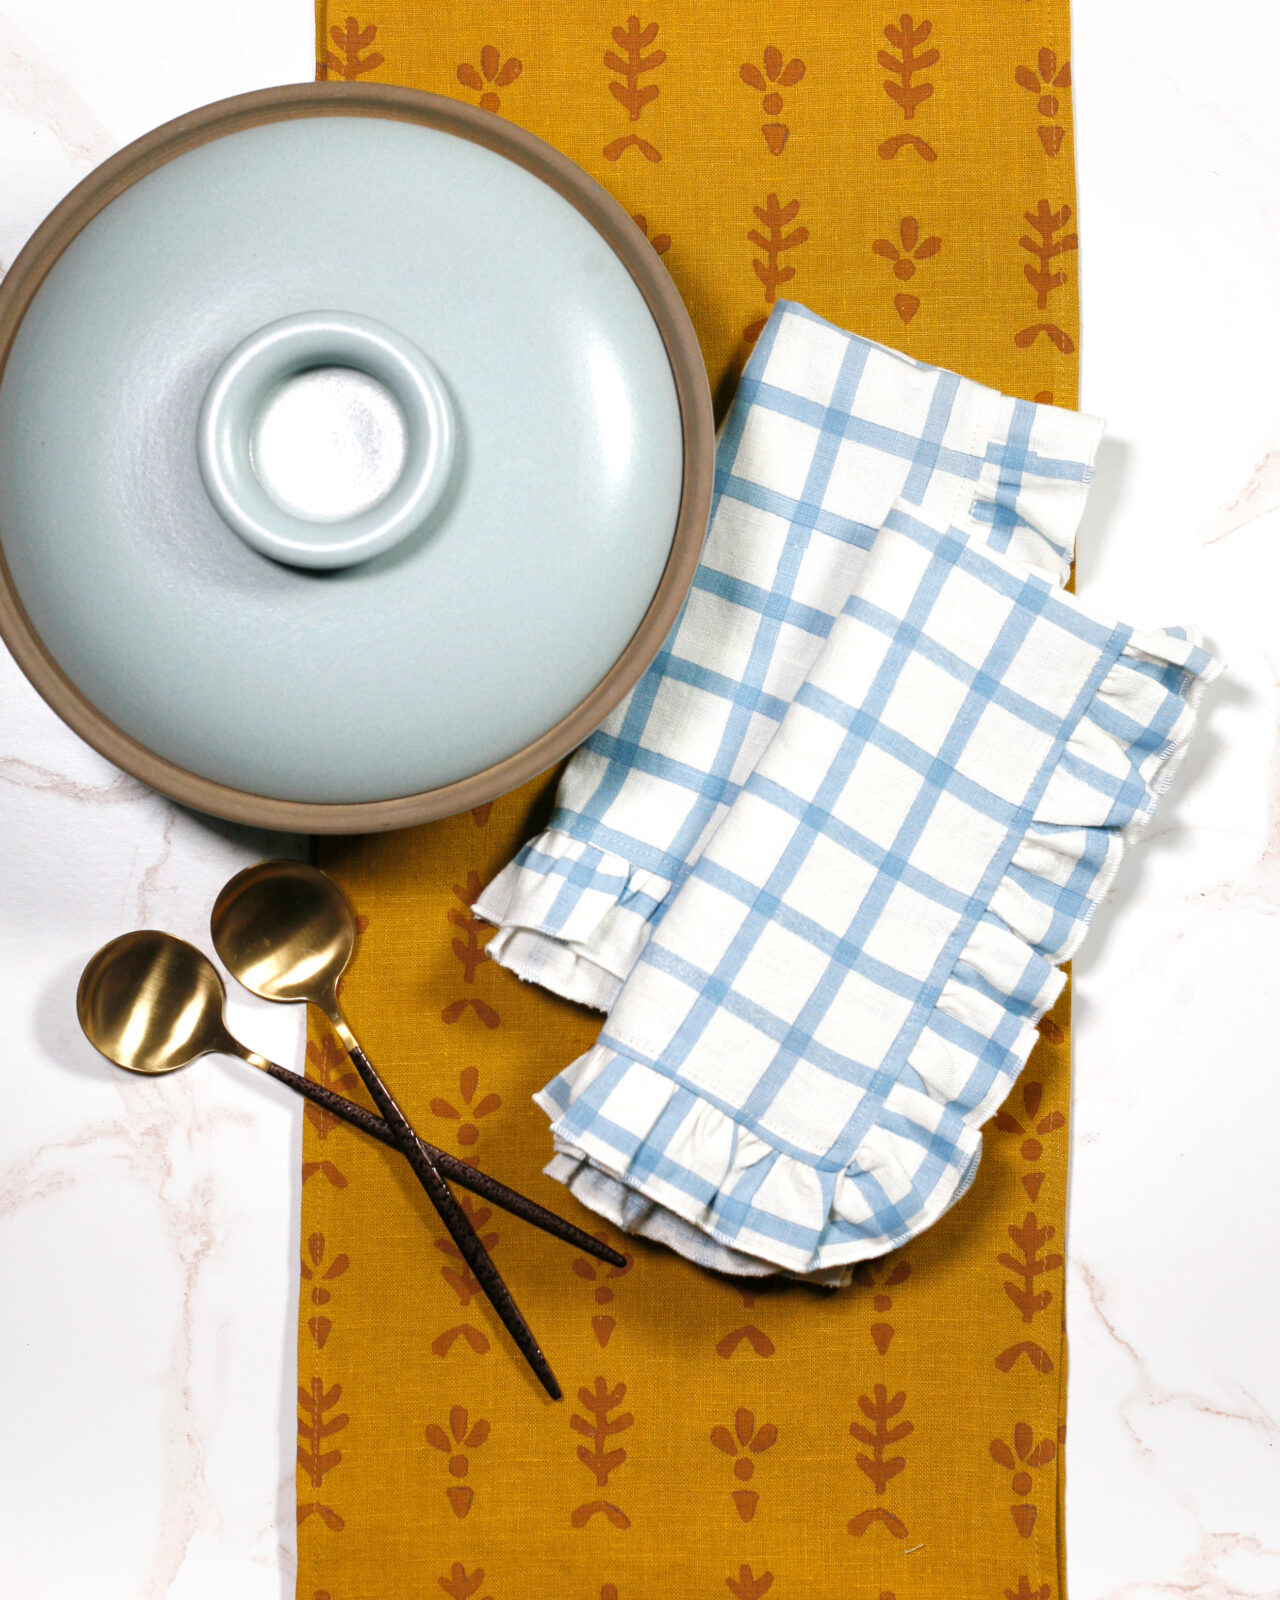 A yellow-printed table runner, blue and white dinner napkins, and serveware are displayed on a table.